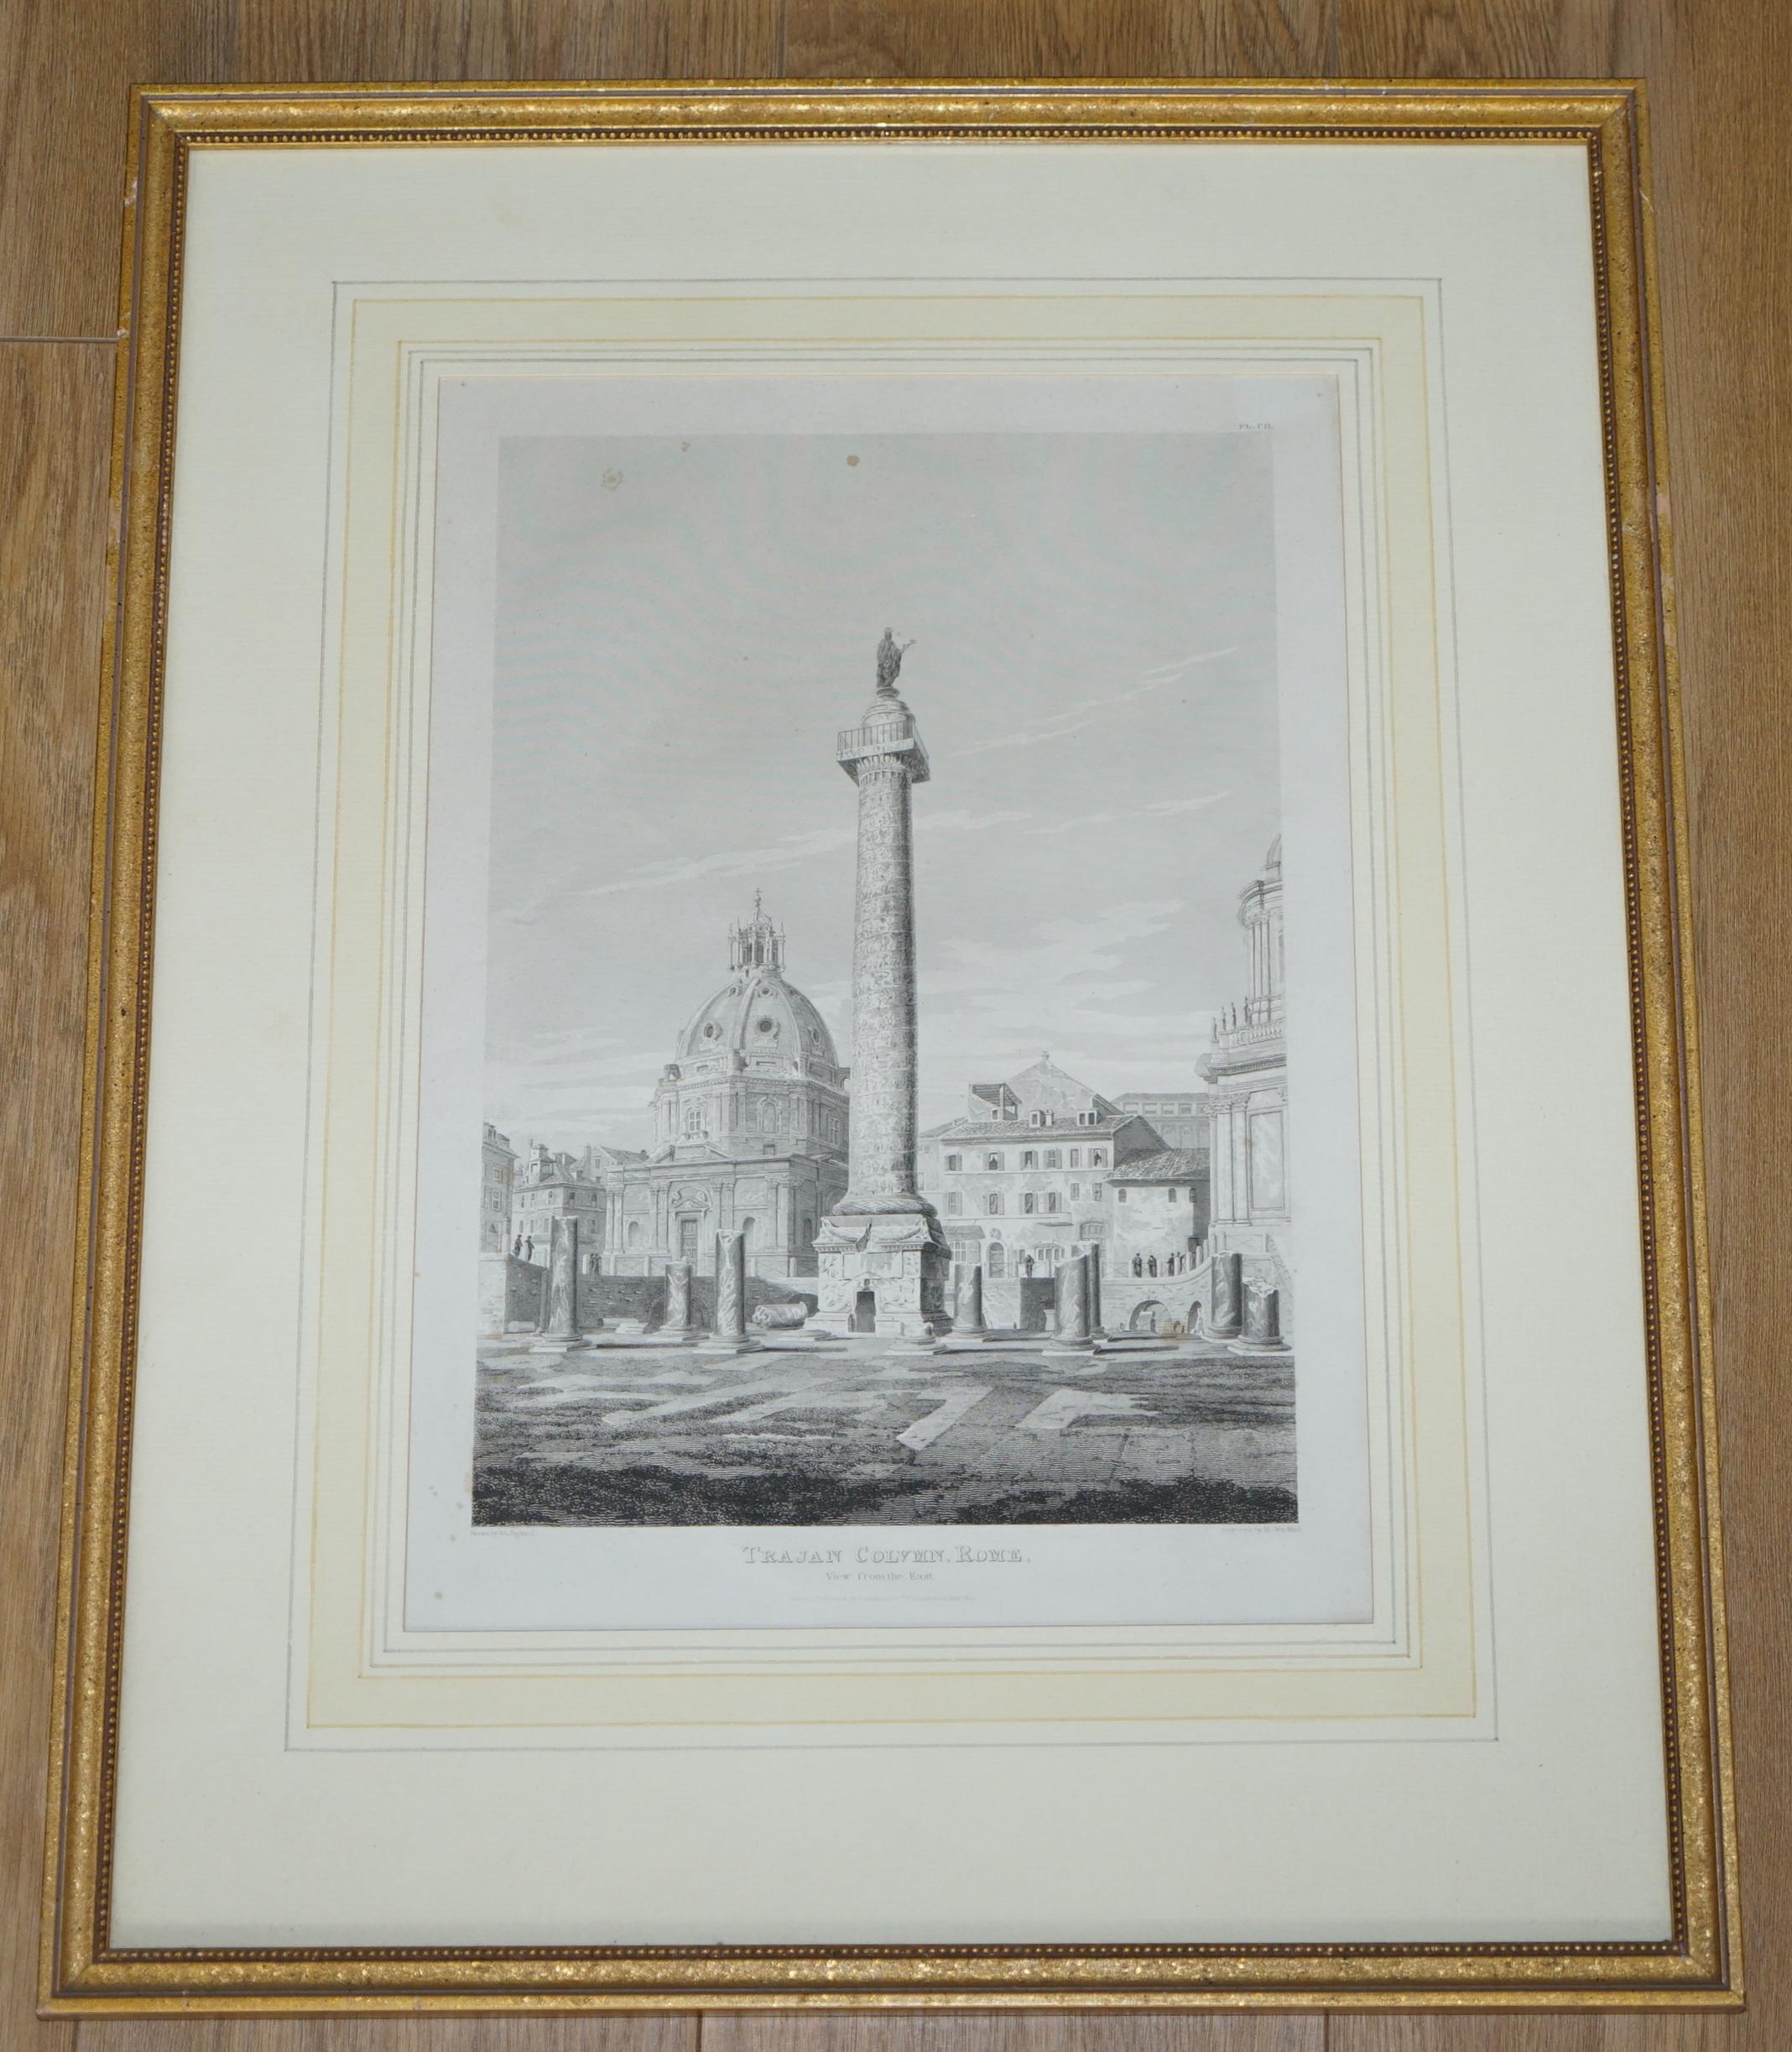 Wimbledon-Furniture

Wimbledon-Furniture is delighted to offer for sale this stunning set of five Victorian Grand Tour prints of the various tourist attractions in Italy

Please note the delivery fee listed is just a guide, it covers within the